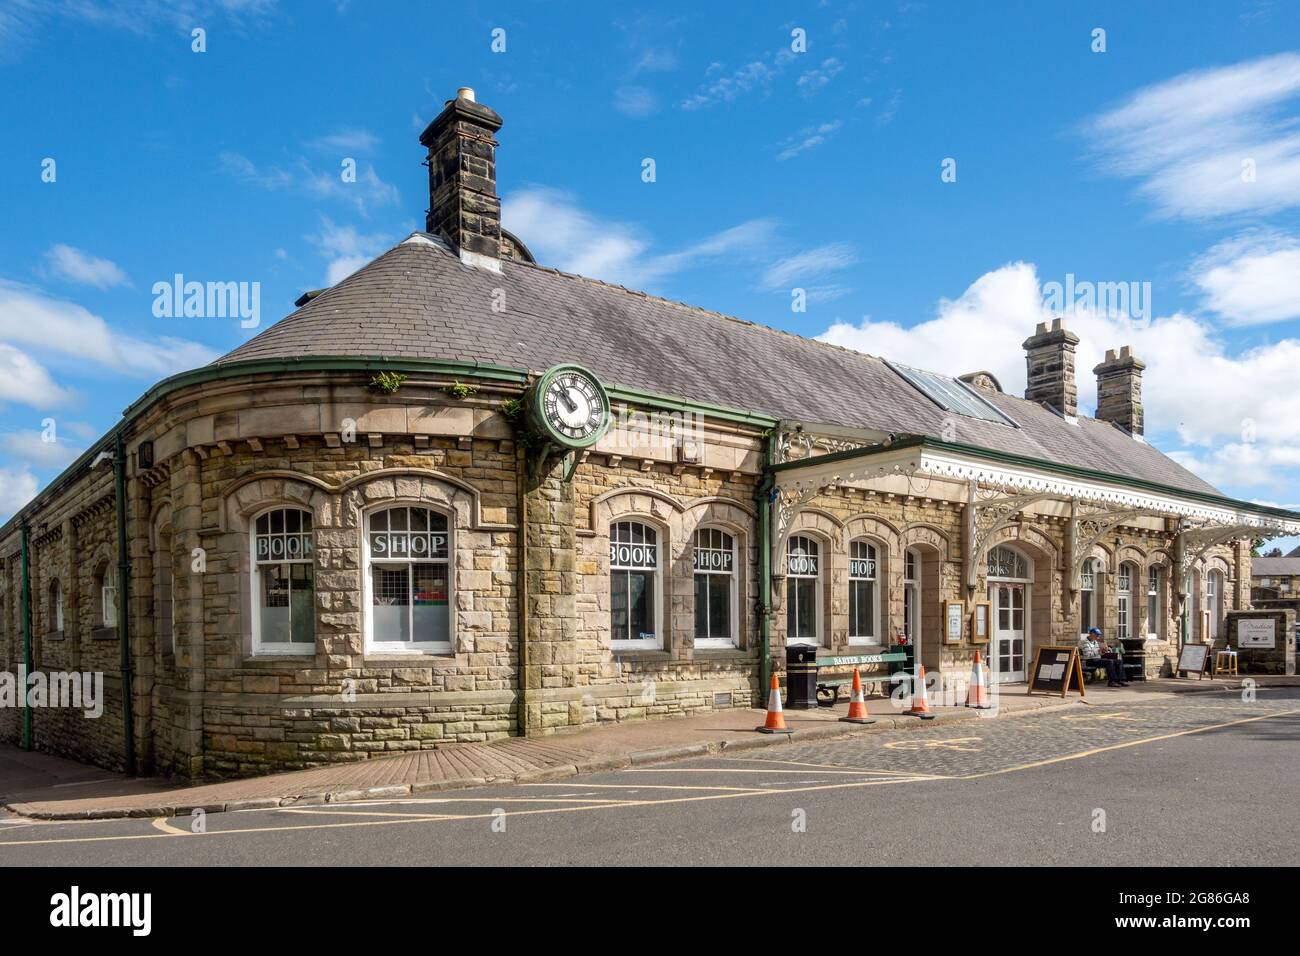 Barter Books, a former railway station and one of the largest secondhand bookshops in Britain, in Alnwick, Northumberland, England, Uk Stock Photo